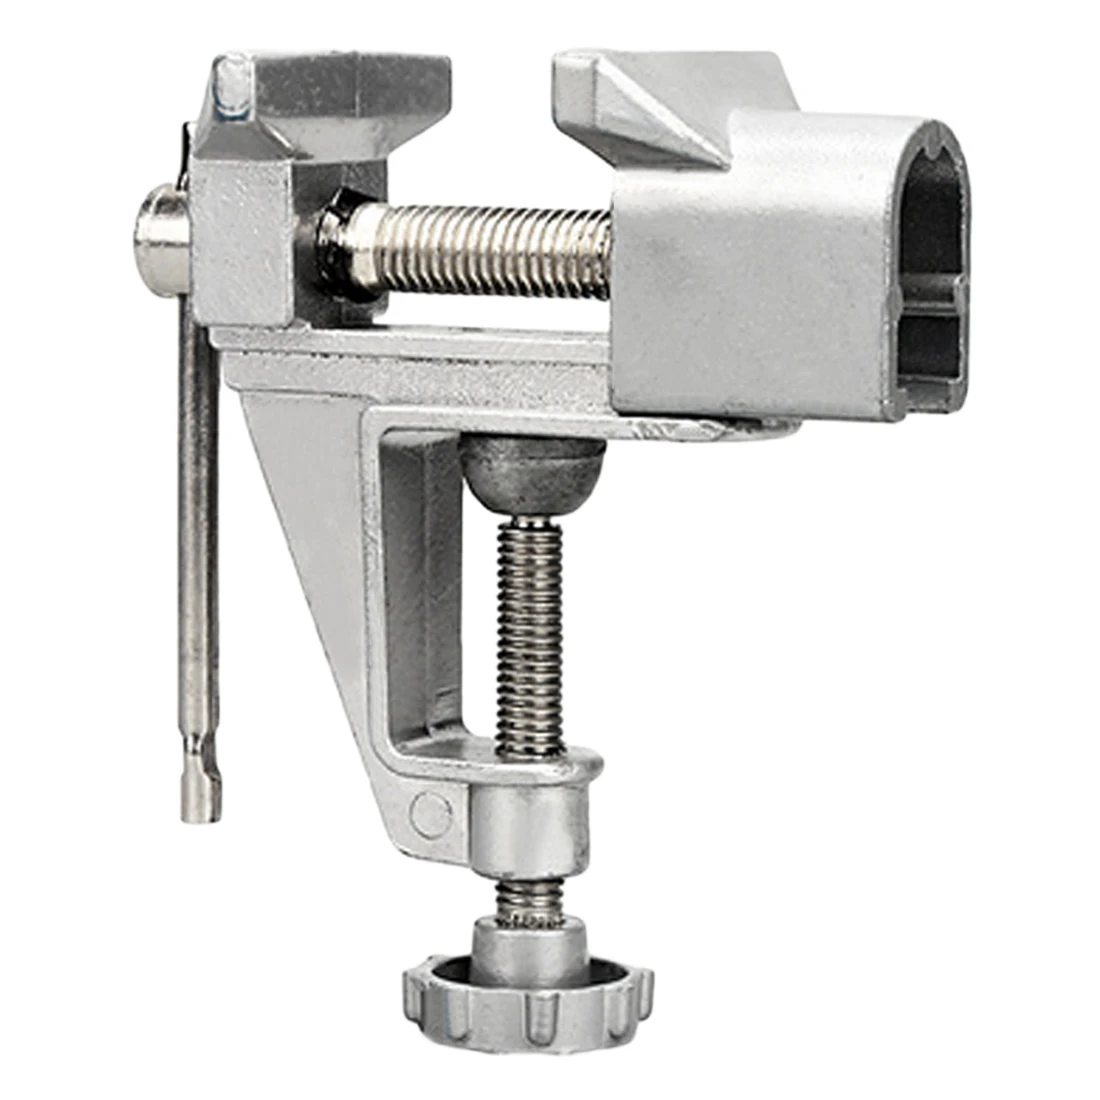 New 30mm Aluminium Alloy Machine Bench Screw Vise Mini Table Vice Bench Clamp Screw Vise for DIY Craft Mould Fixed Repair Tool enlarge